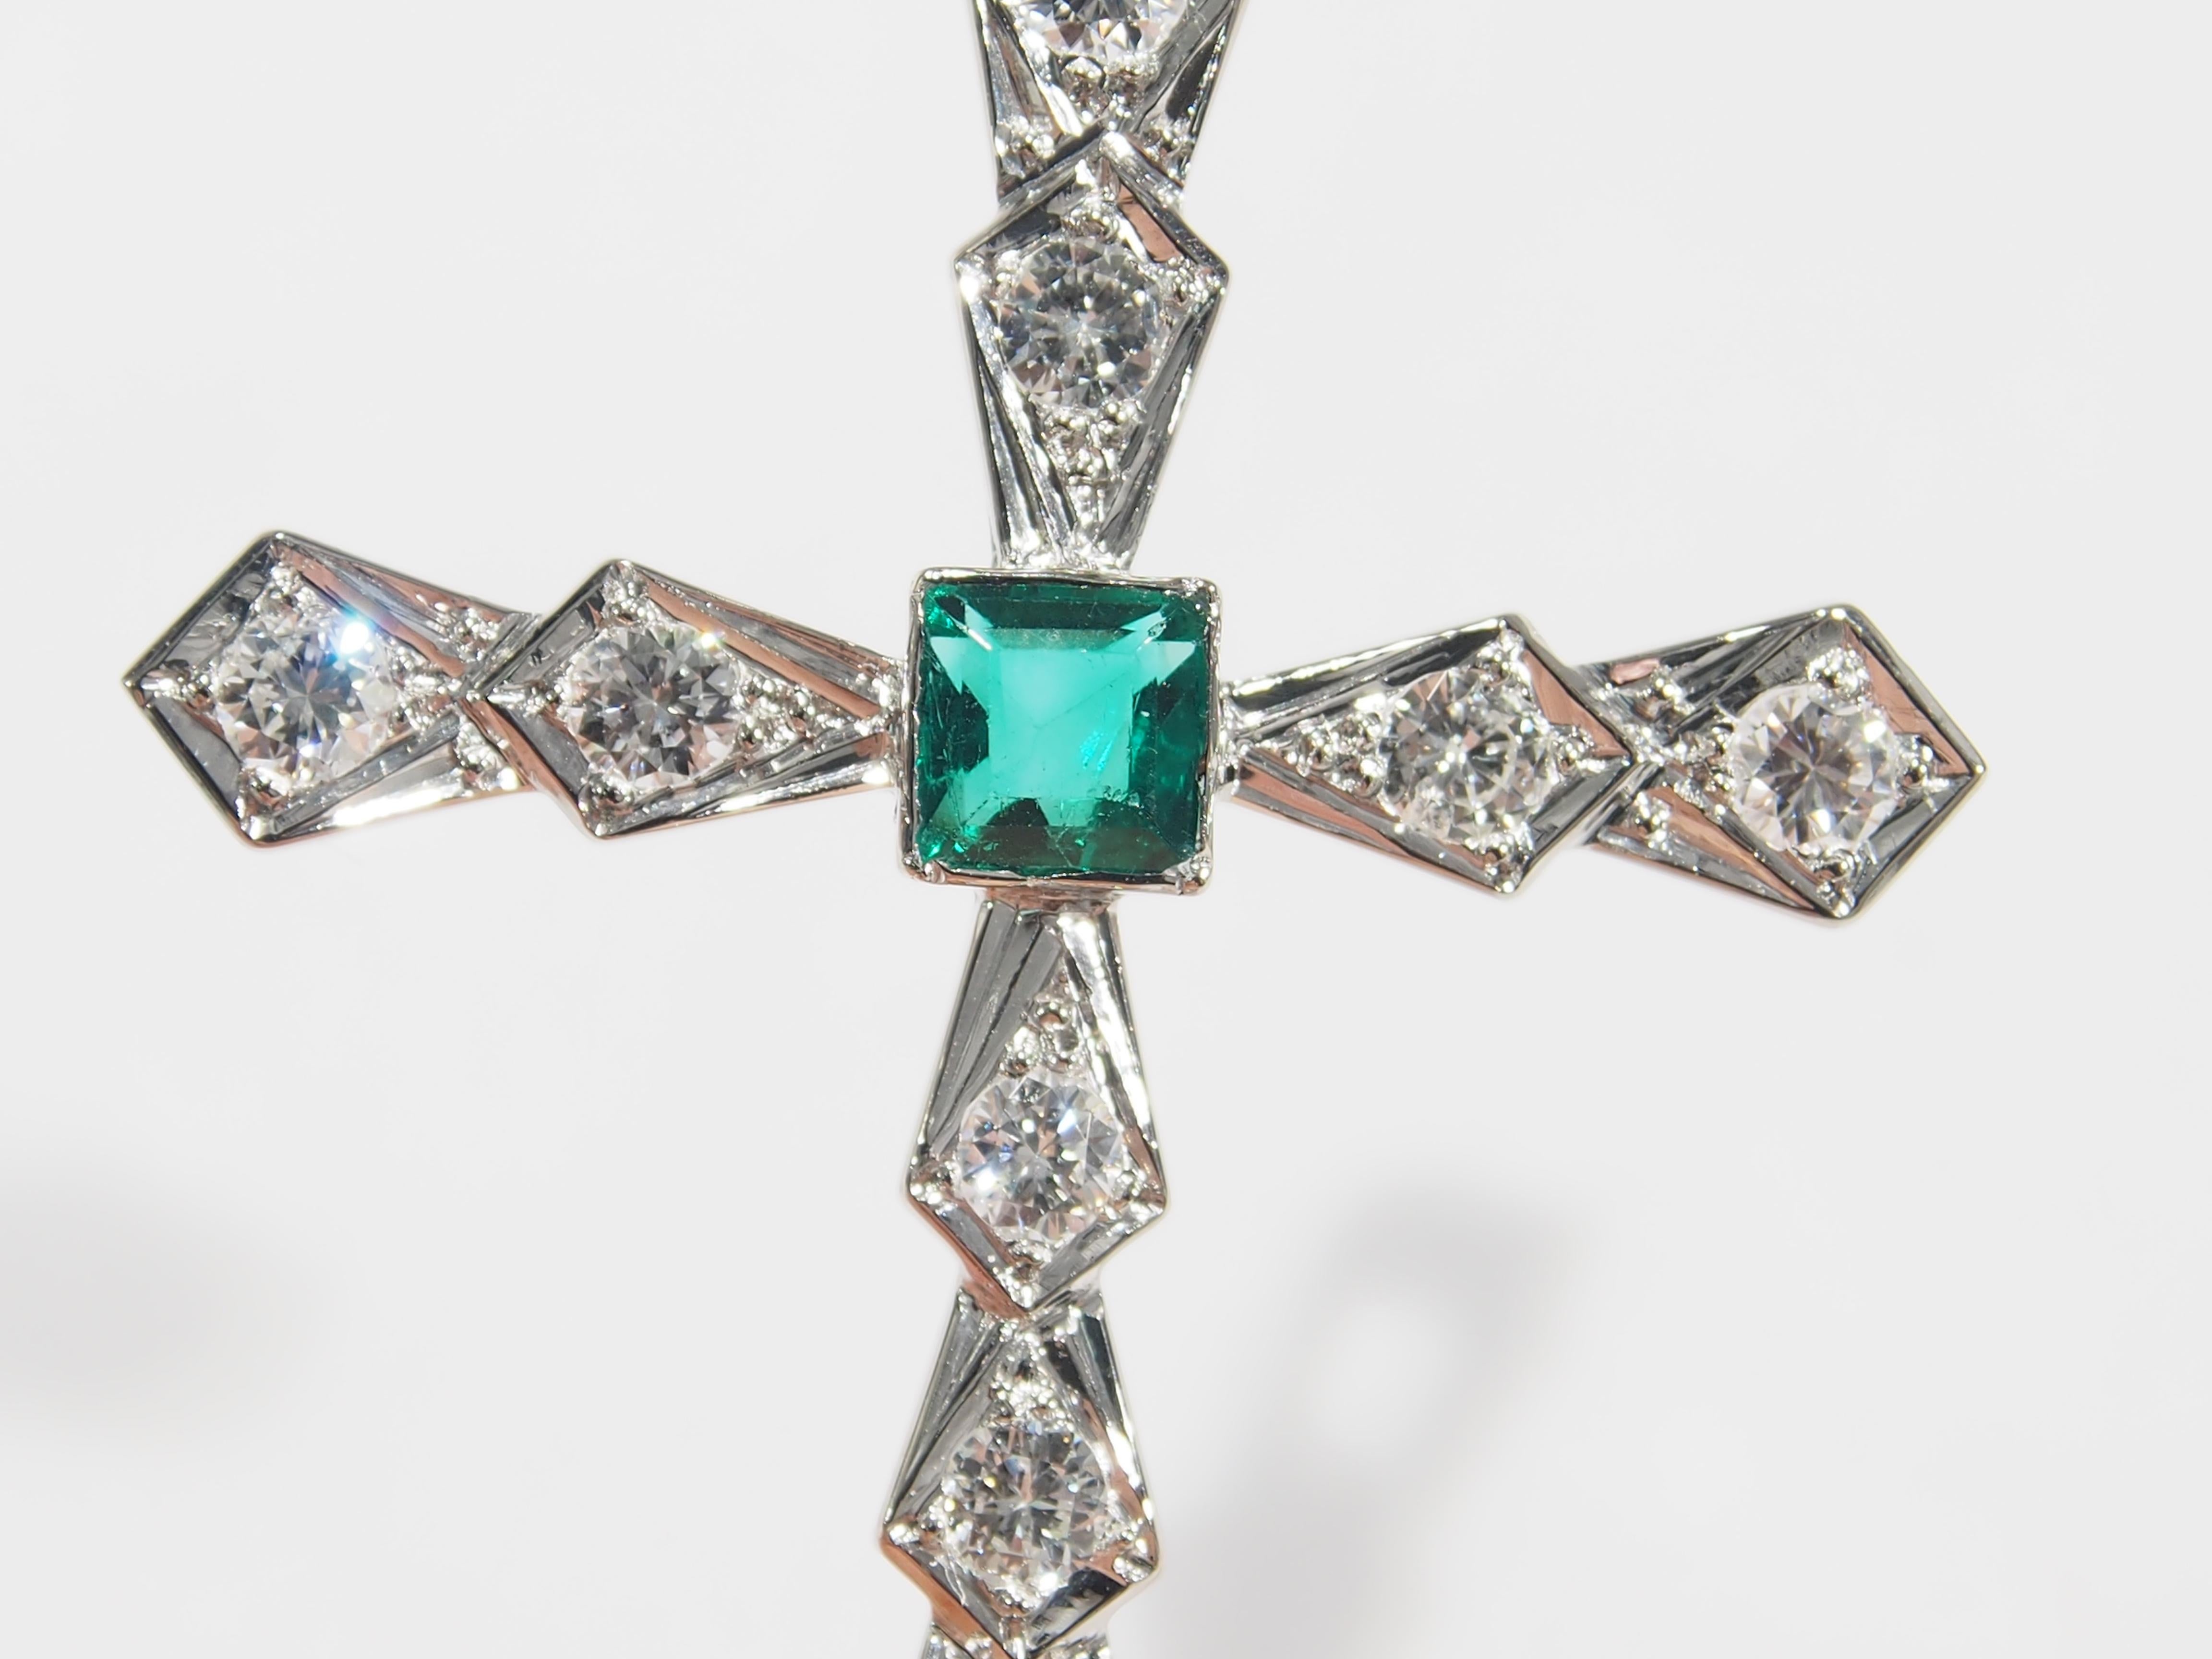 This is a unique 18K White Gold Cross Charm handmade with interlocking triangles. Set in each Triangle are (12) Round Brilliant Cut Diamonds, approximately 1.00ctw, G-H in Color, VS in Clarity that are accented by (1) Square Step Cut Emerald,